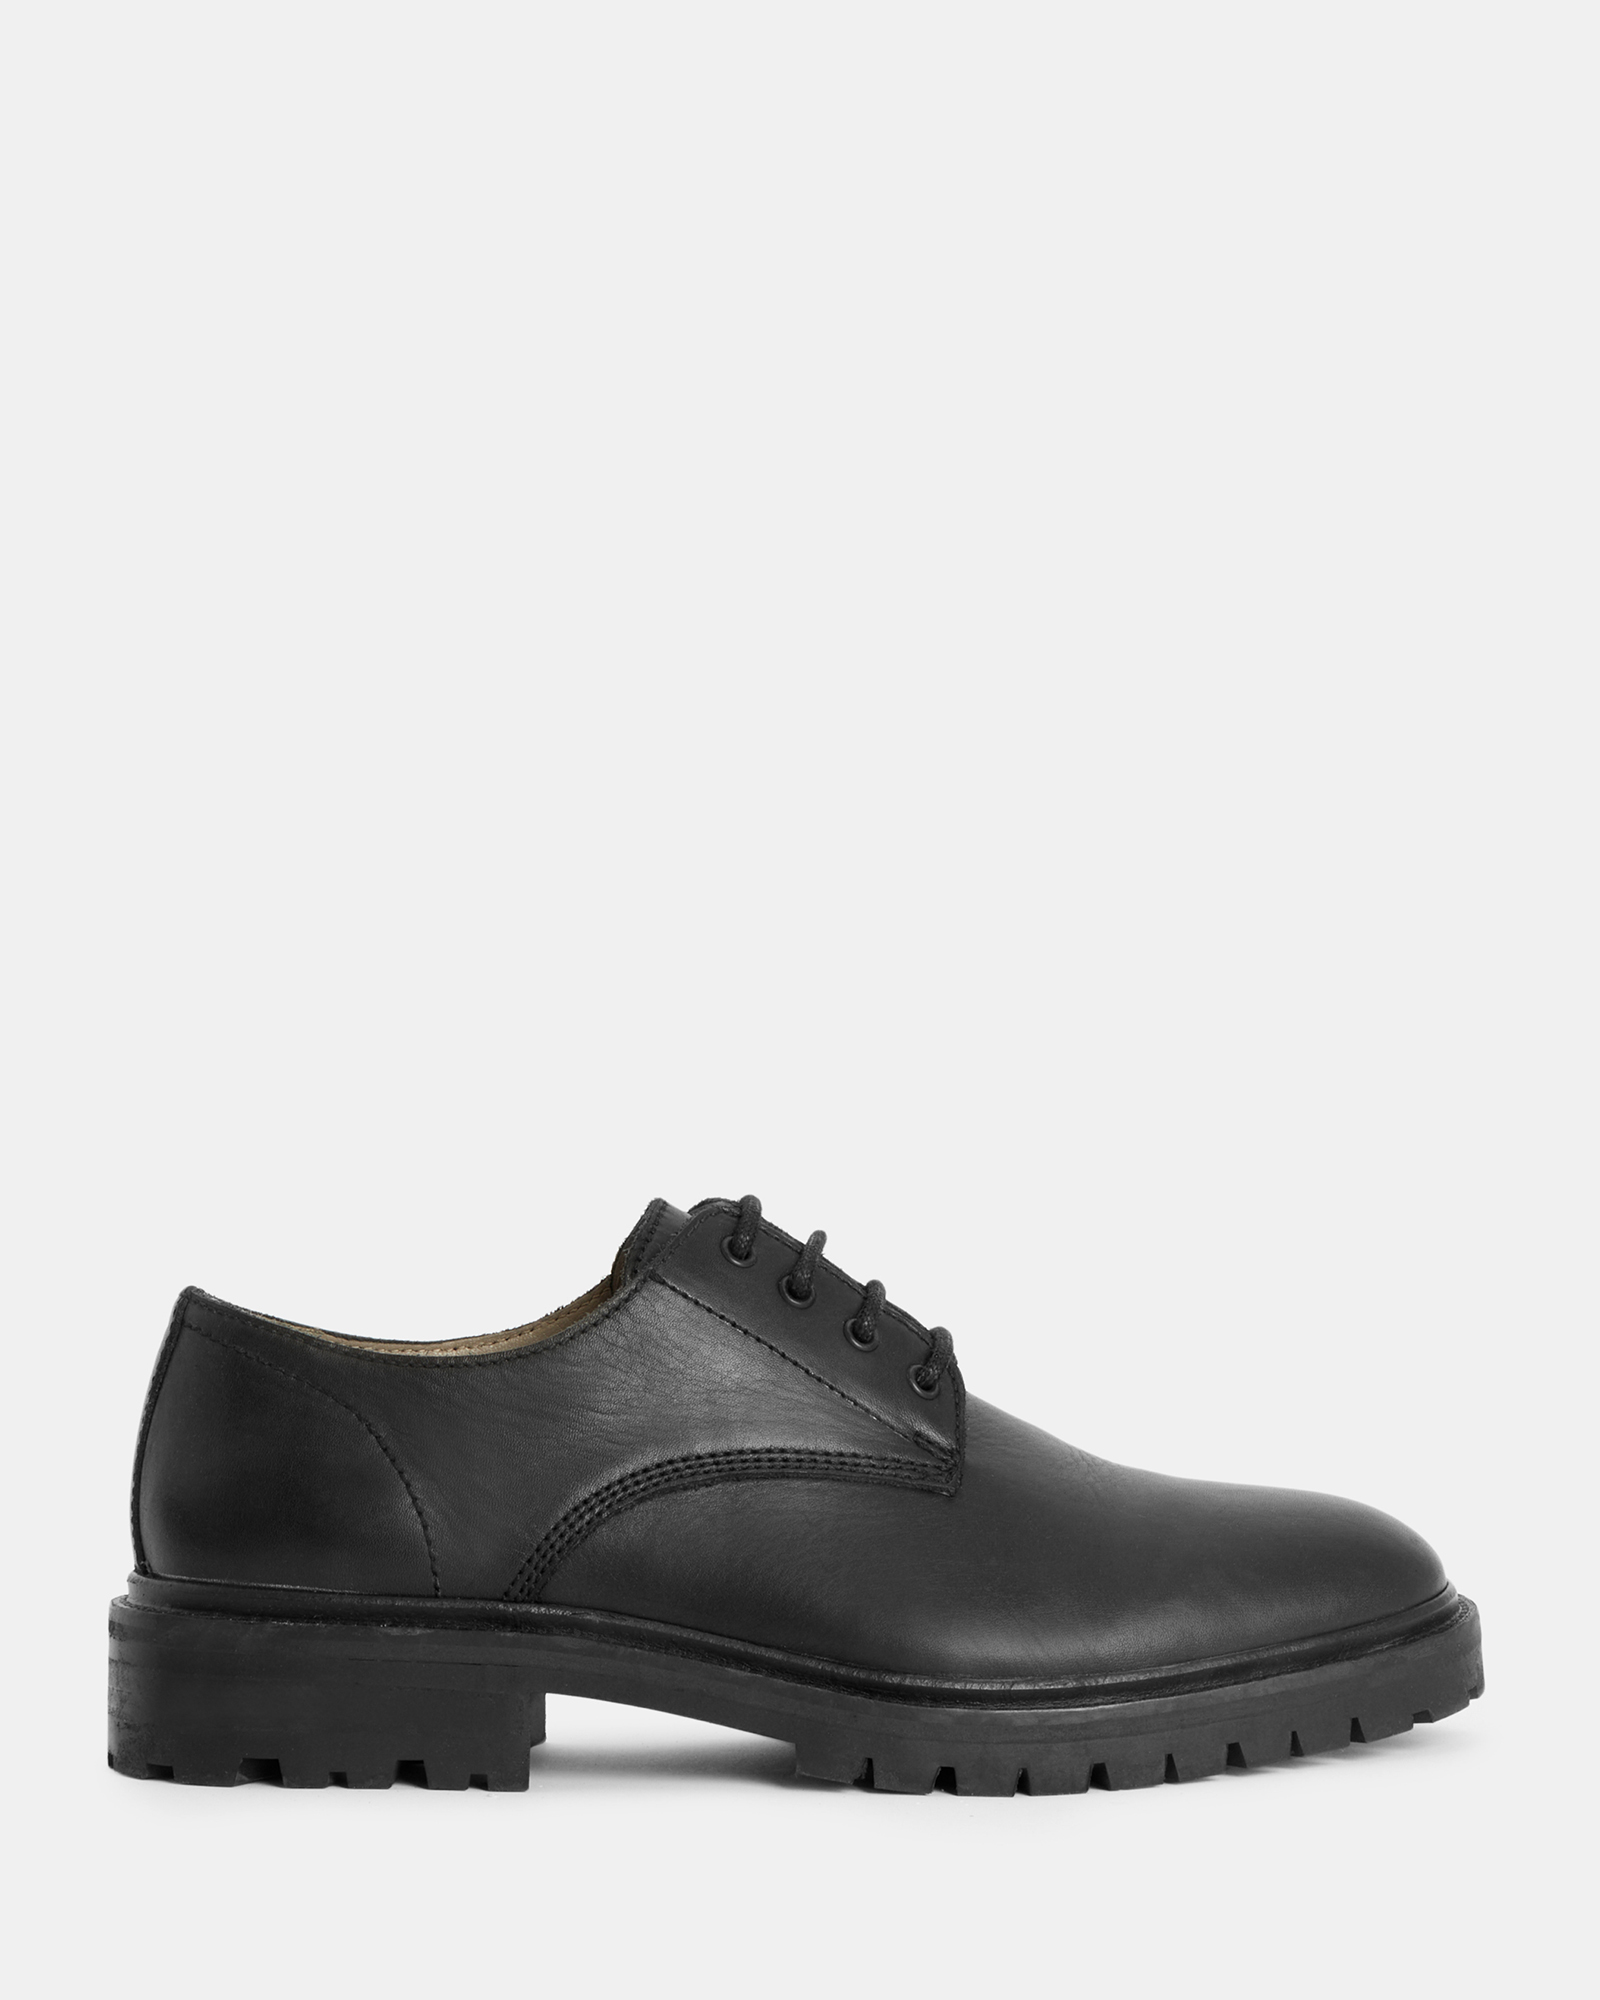 ALLSAINTS ALLSAINTS JARRED CLEATED SOLE FORMAL LEATHER SHOES